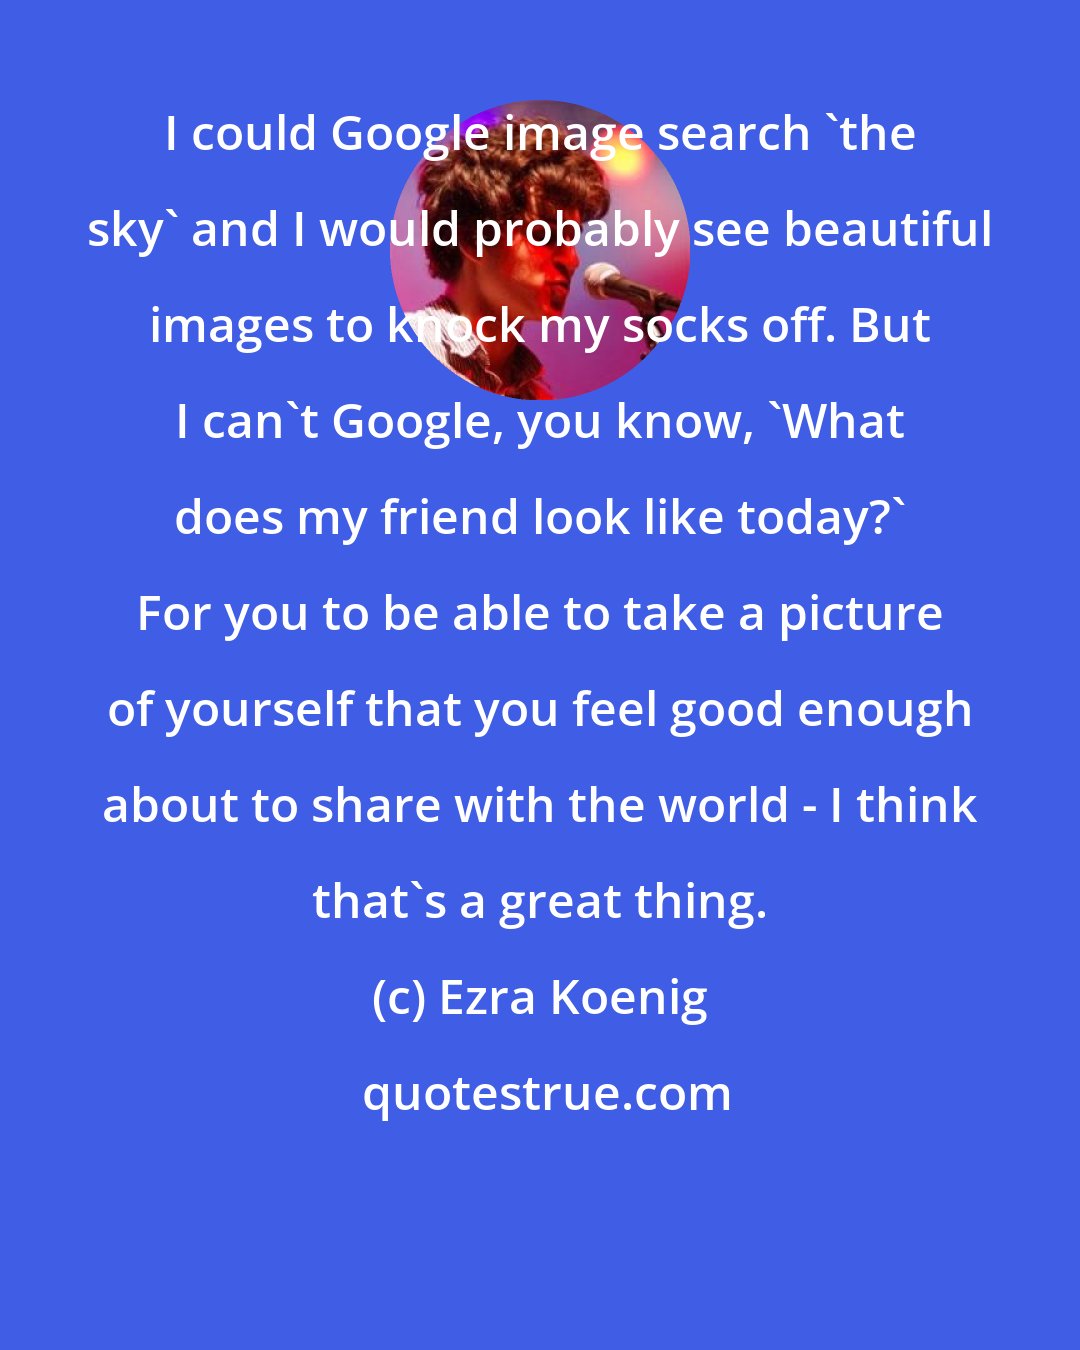 Ezra Koenig: I could Google image search 'the sky' and I would probably see beautiful images to knock my socks off. But I can't Google, you know, 'What does my friend look like today?' For you to be able to take a picture of yourself that you feel good enough about to share with the world - I think that's a great thing.